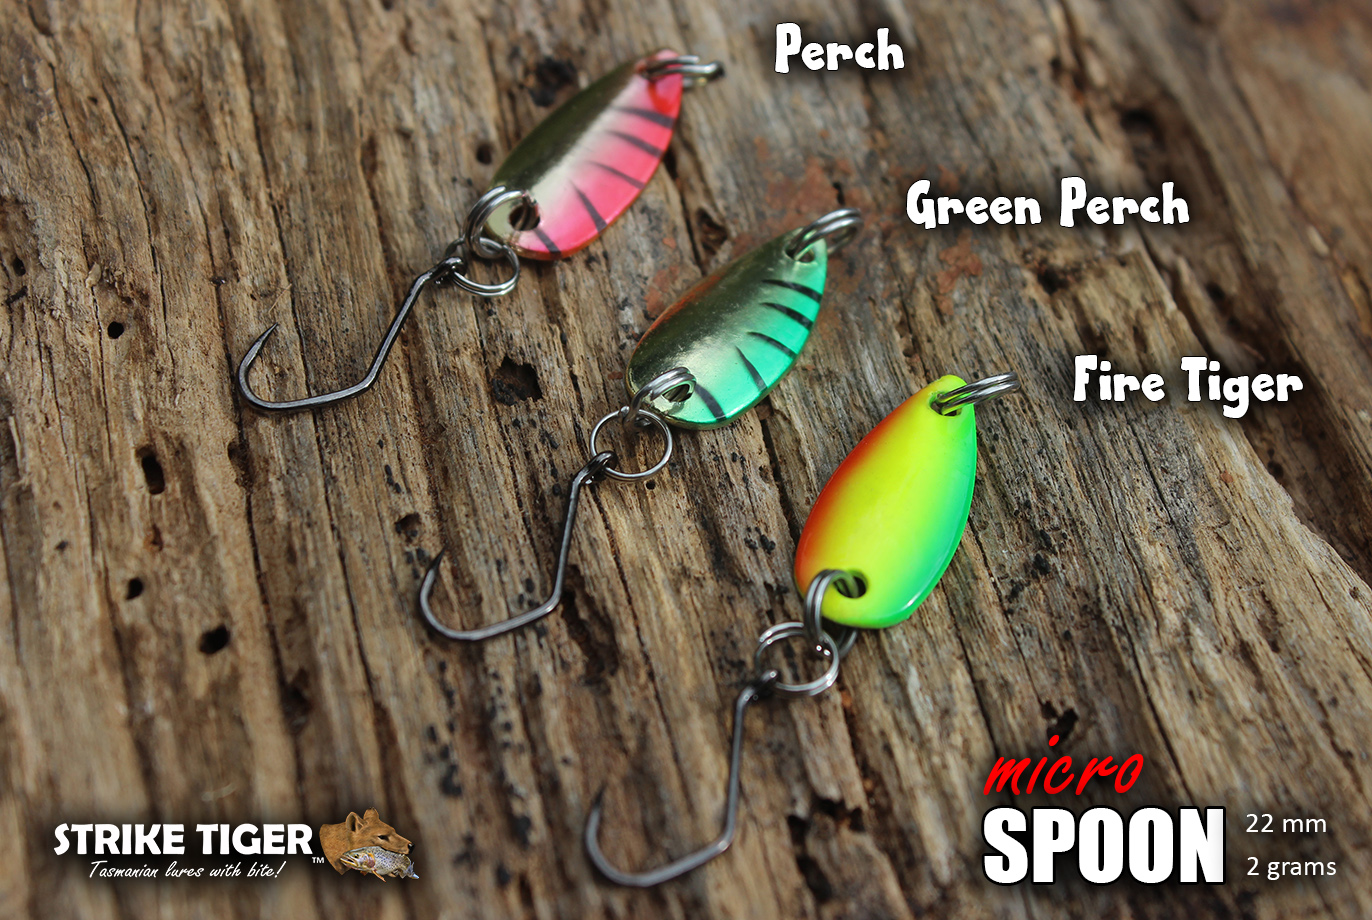 Fishing with Strike Tiger micro spoons